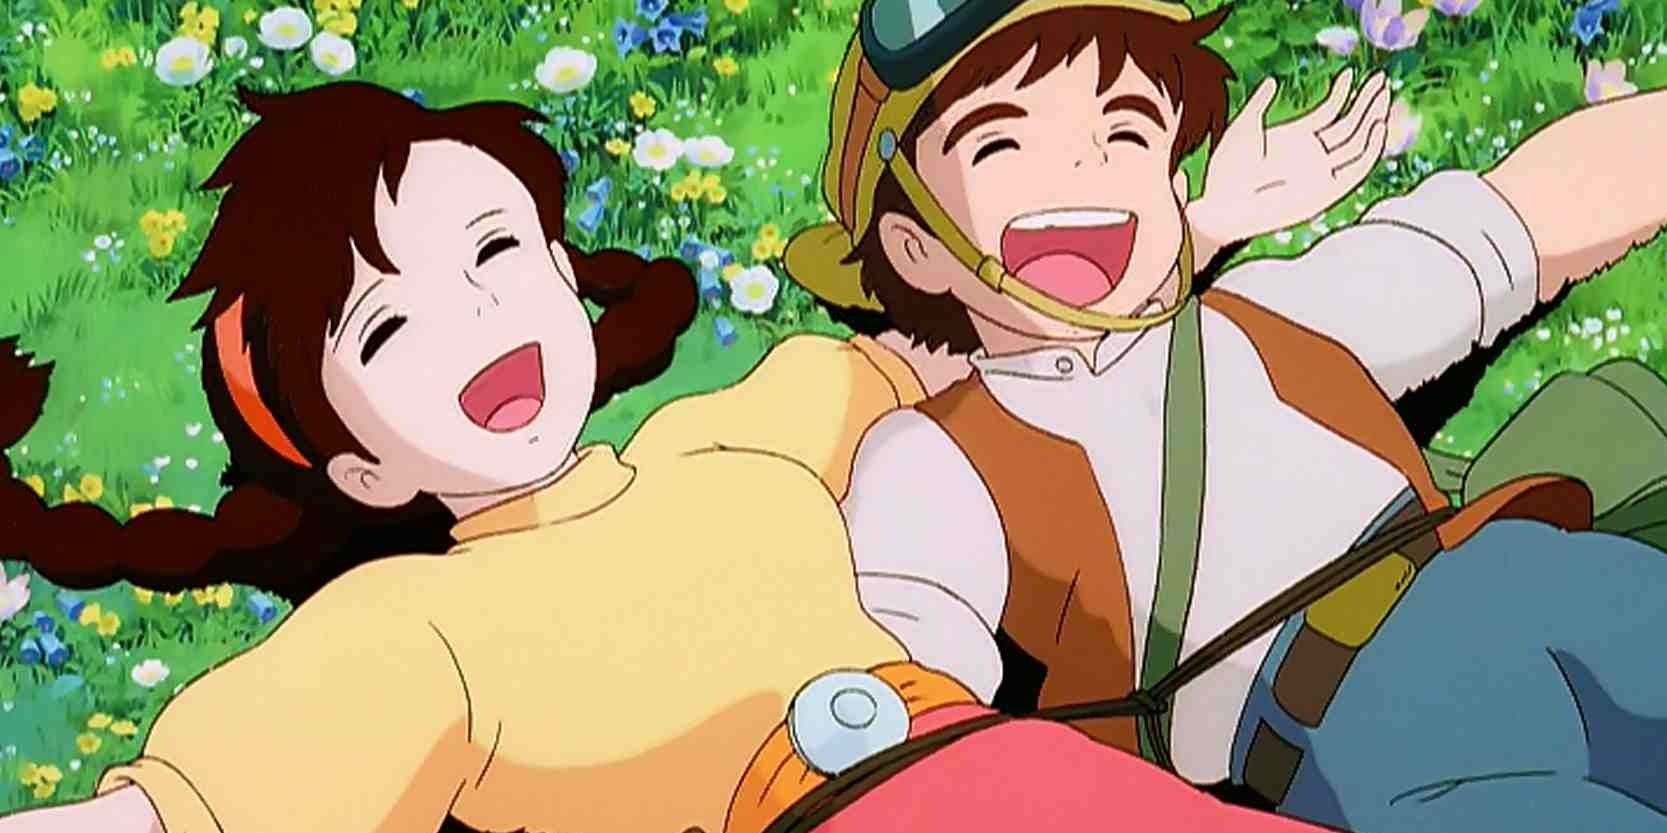 Sheeta and Pazu from Castle in the Sky lying in the grass and laughing together